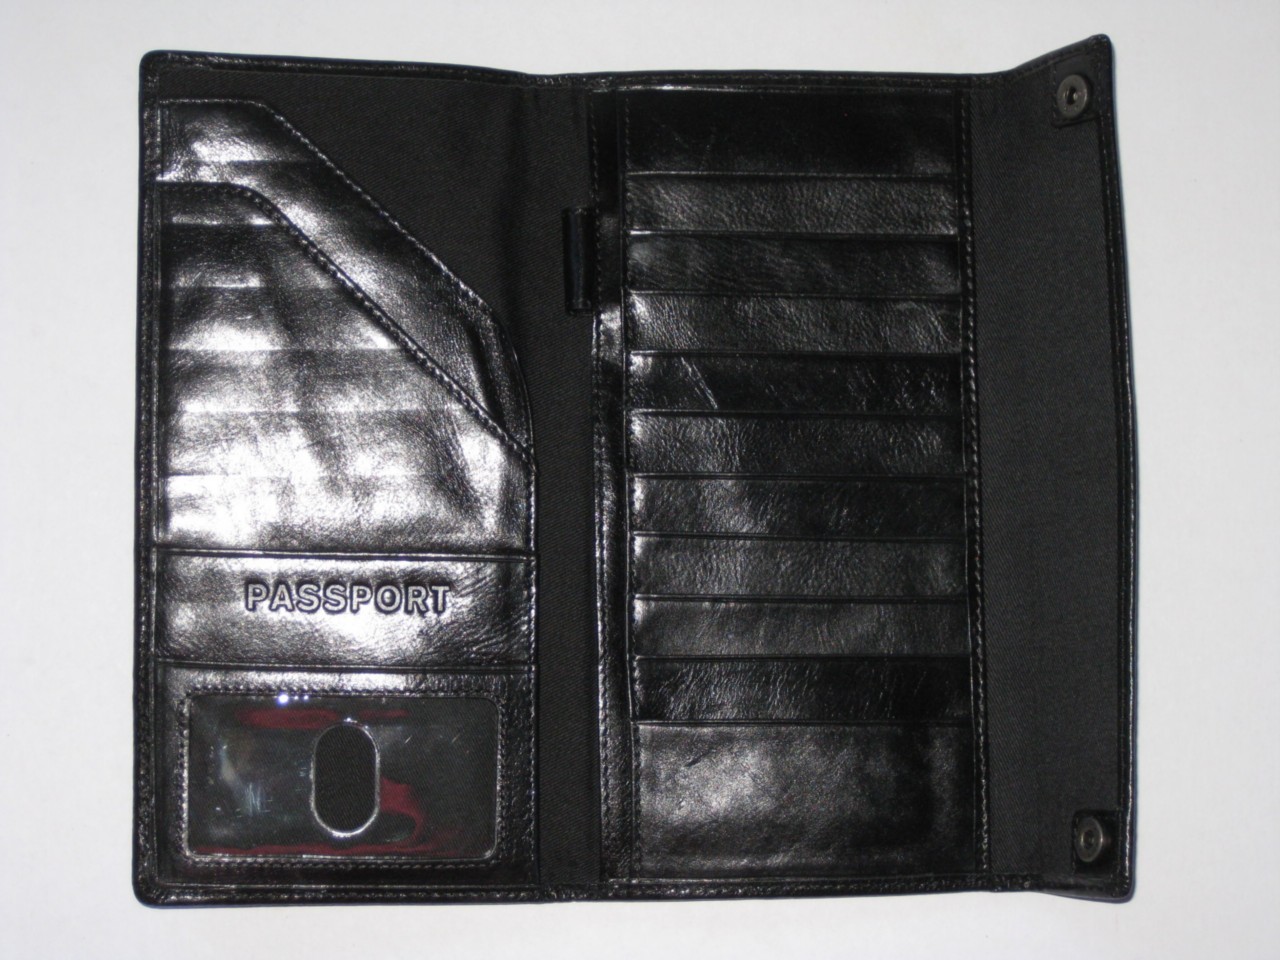 NWT Authentic Fossil Transit Passport Travel Document Wallet Black ...